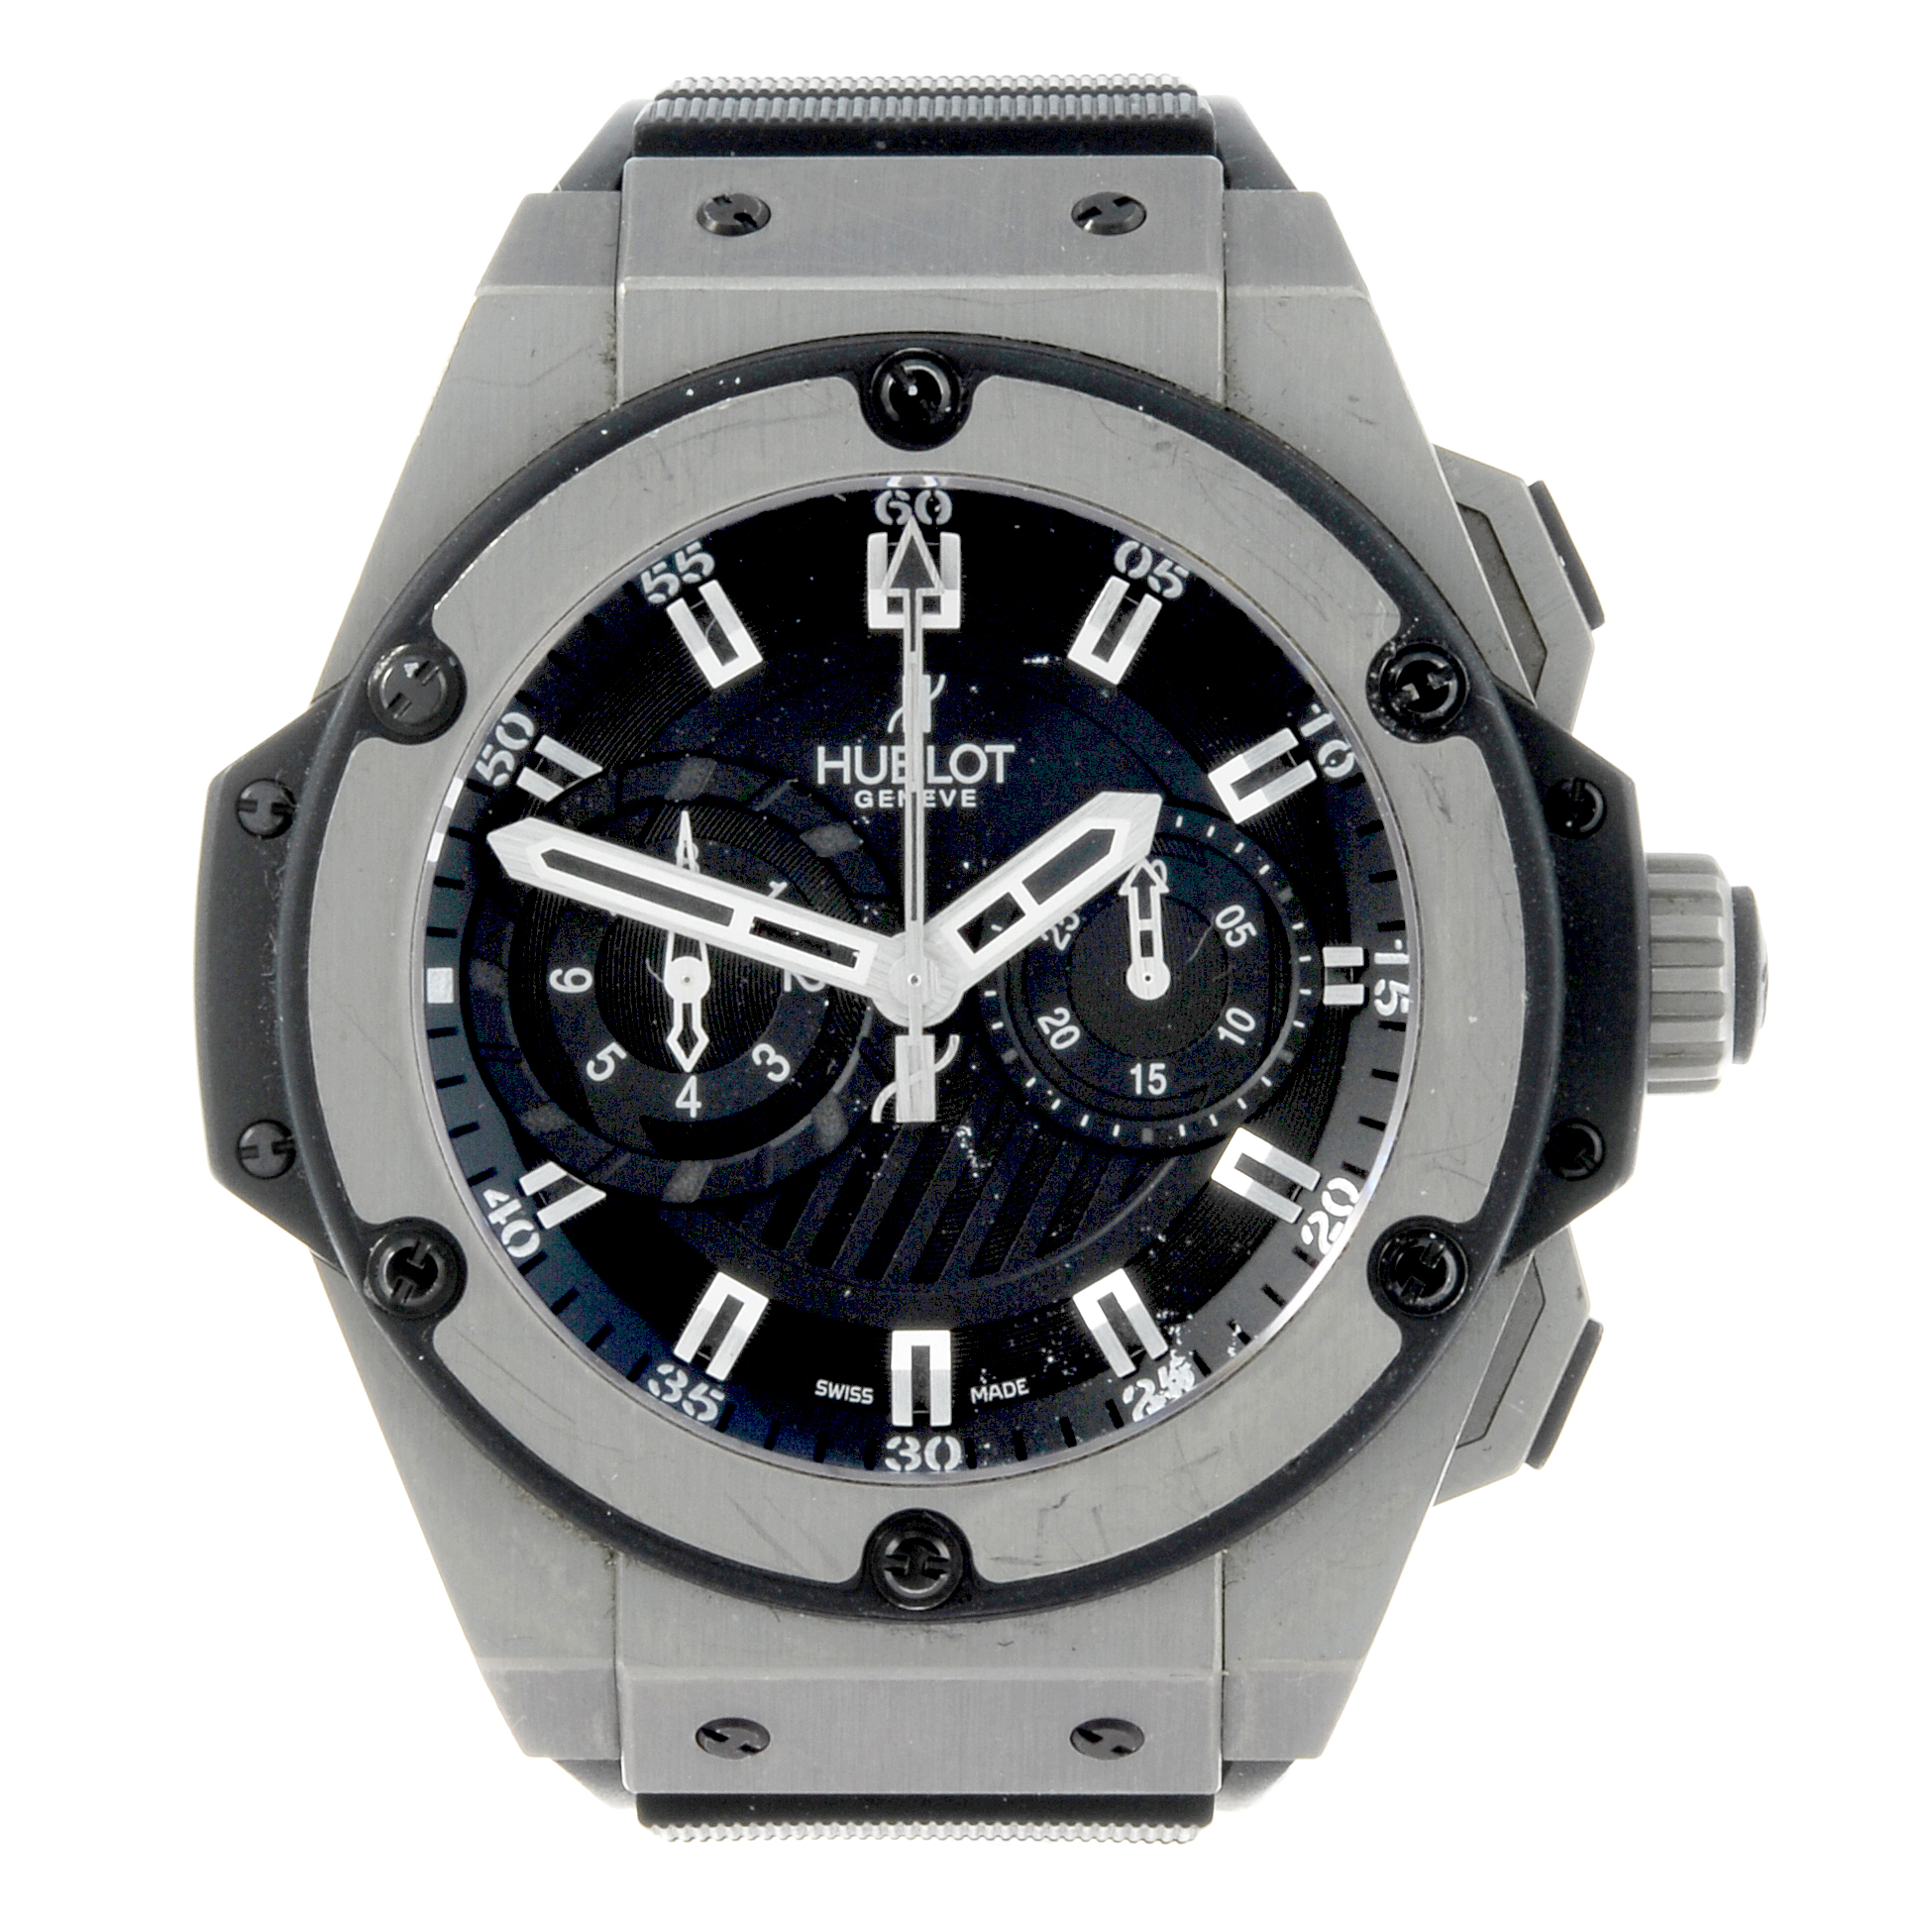 HUBLOT - a limited edition gentleman's King Power chronograph wrist watch. Number 16 of 500.